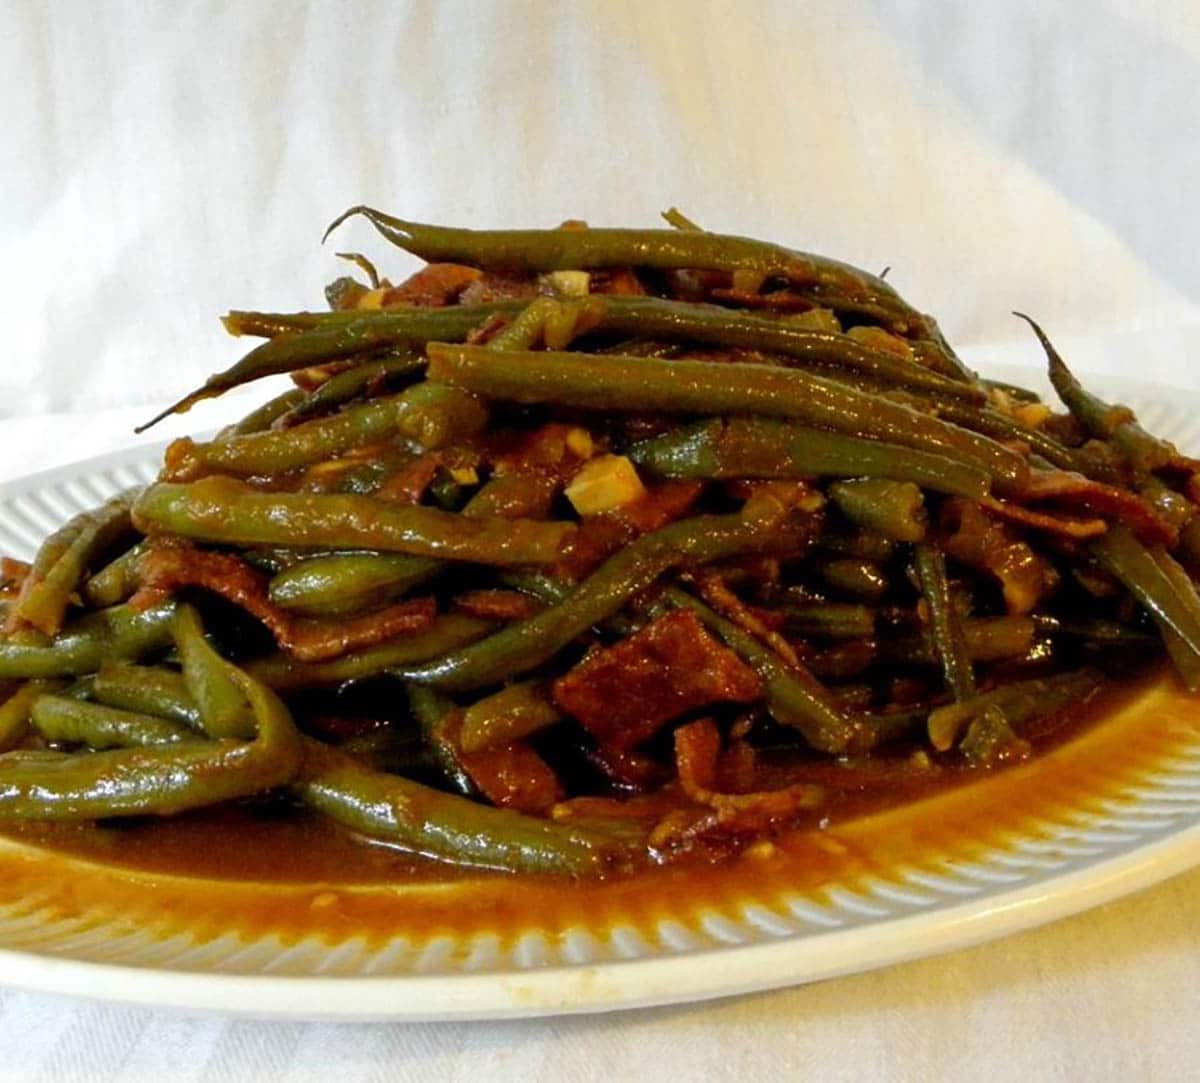 Green Beans with bacon, tomato sauce, and cayenne pepper 